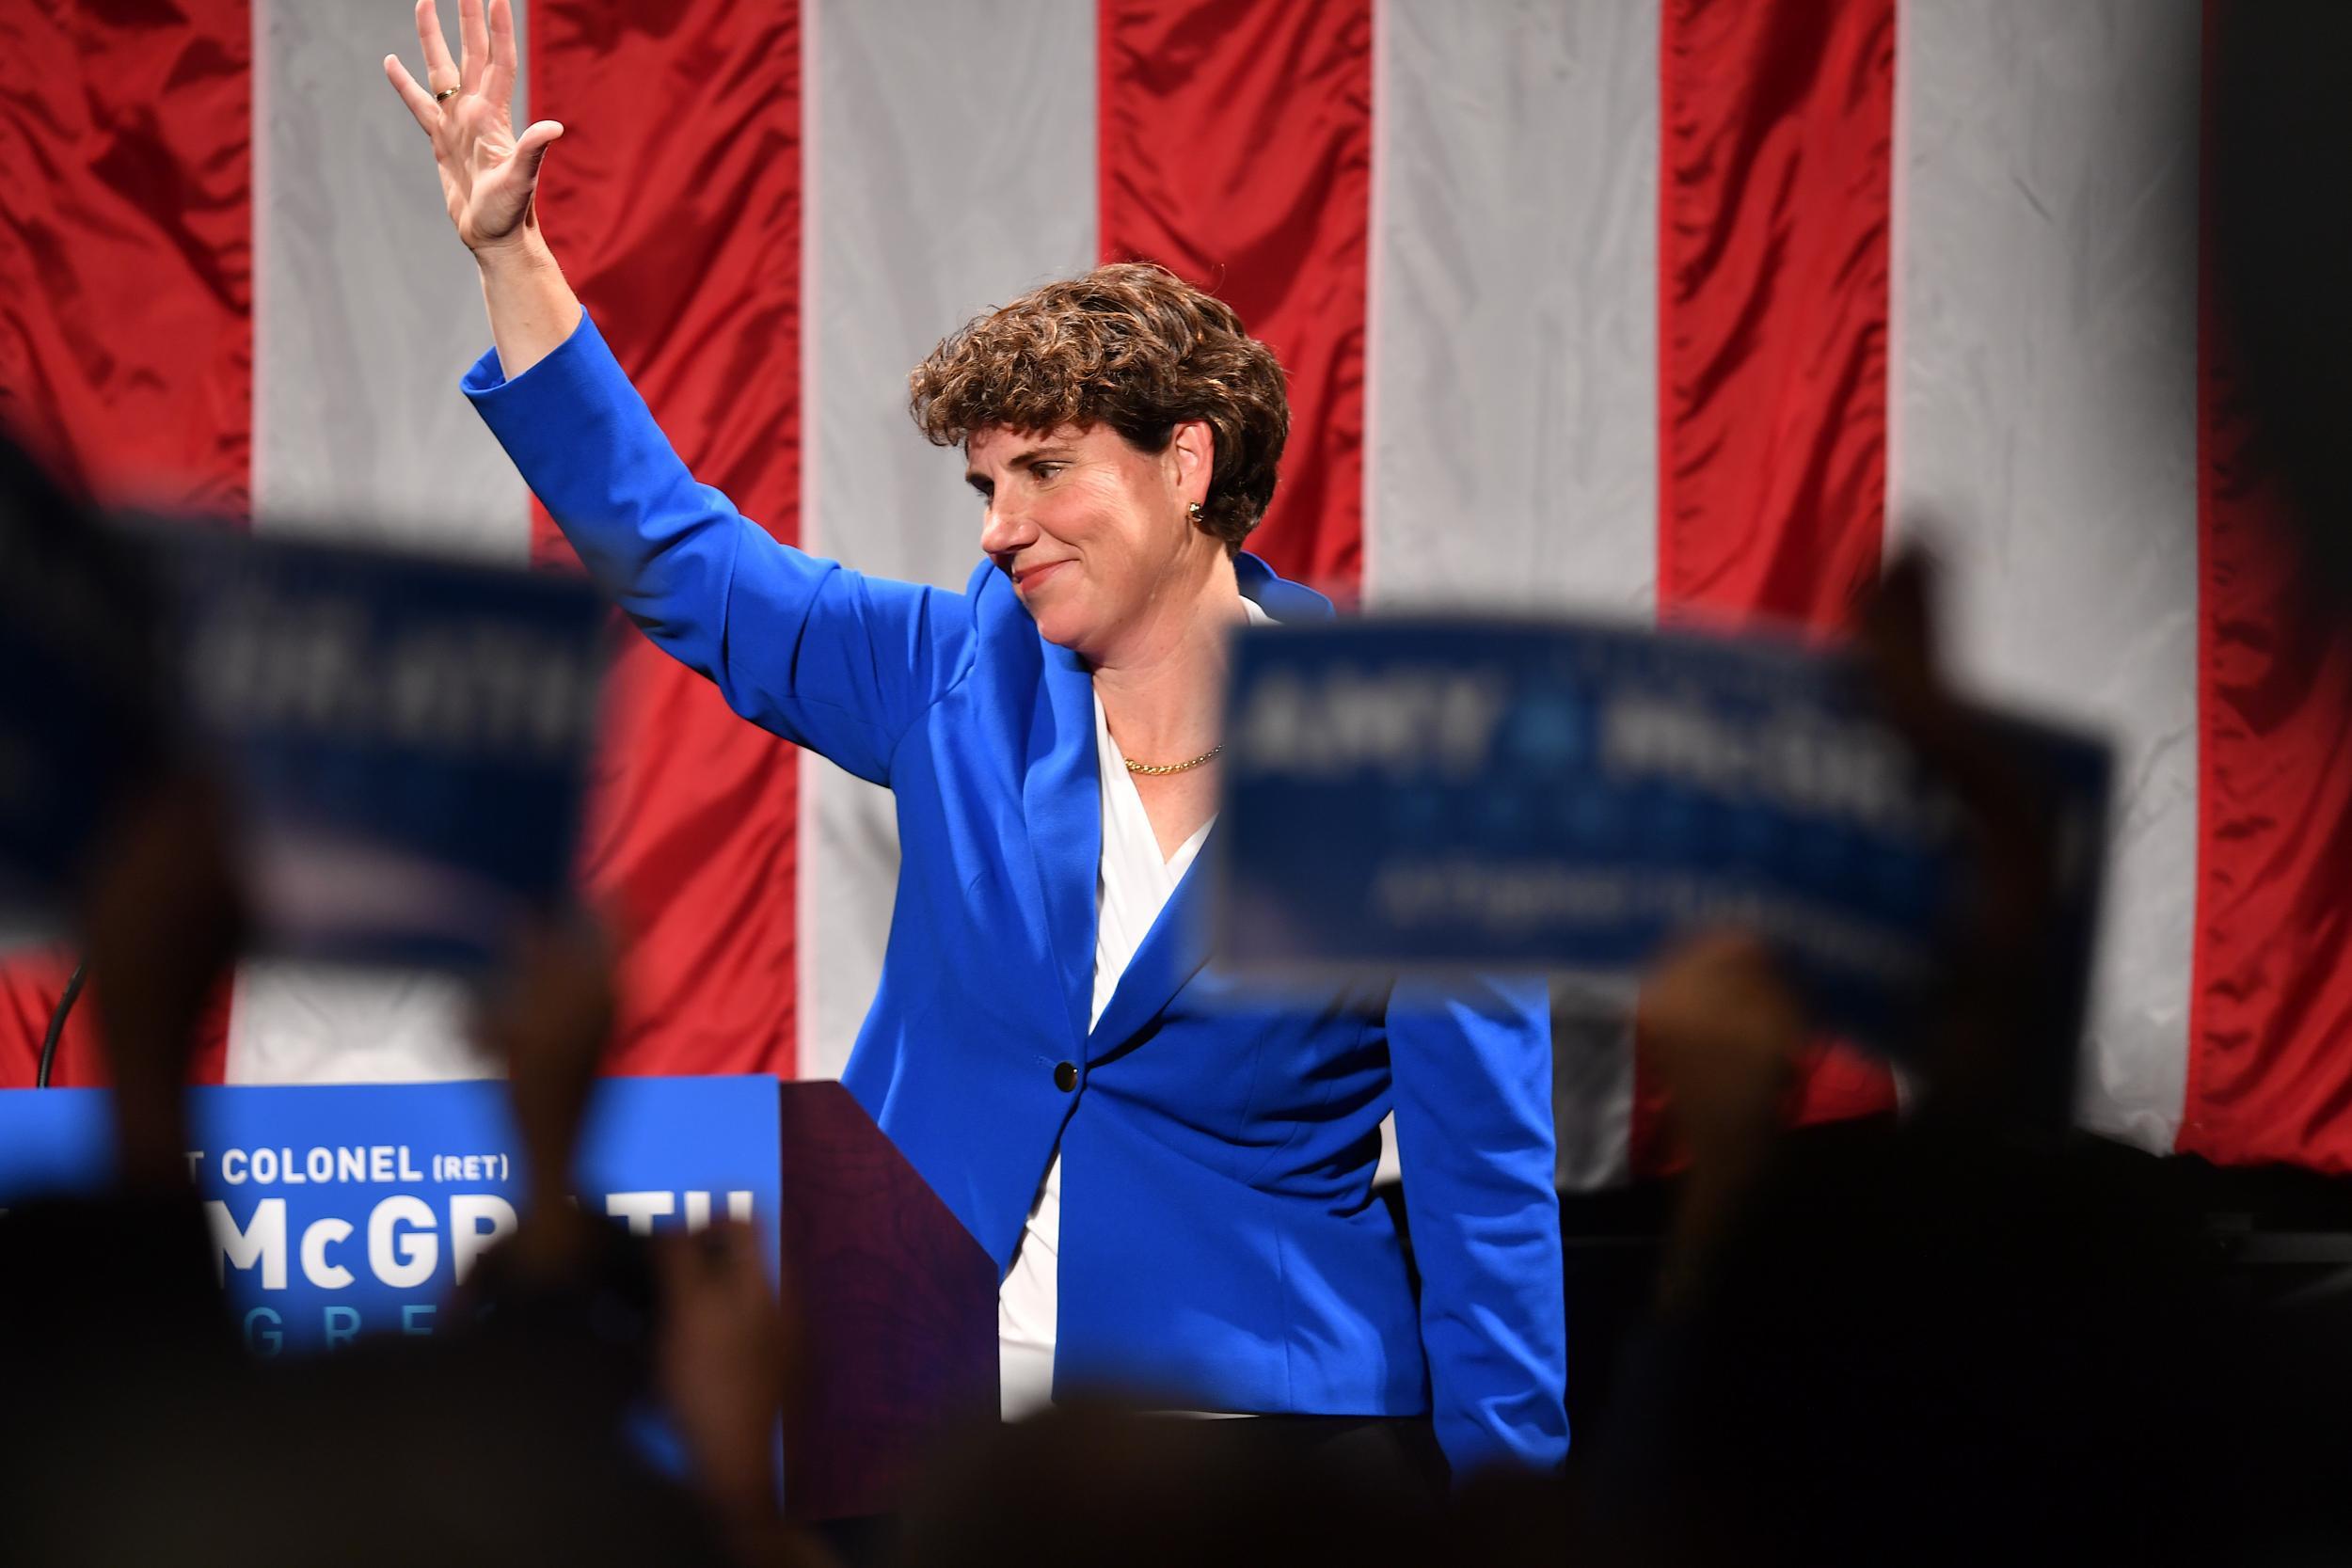 Amy McGrath scored a narrow victory over Charles Booker today